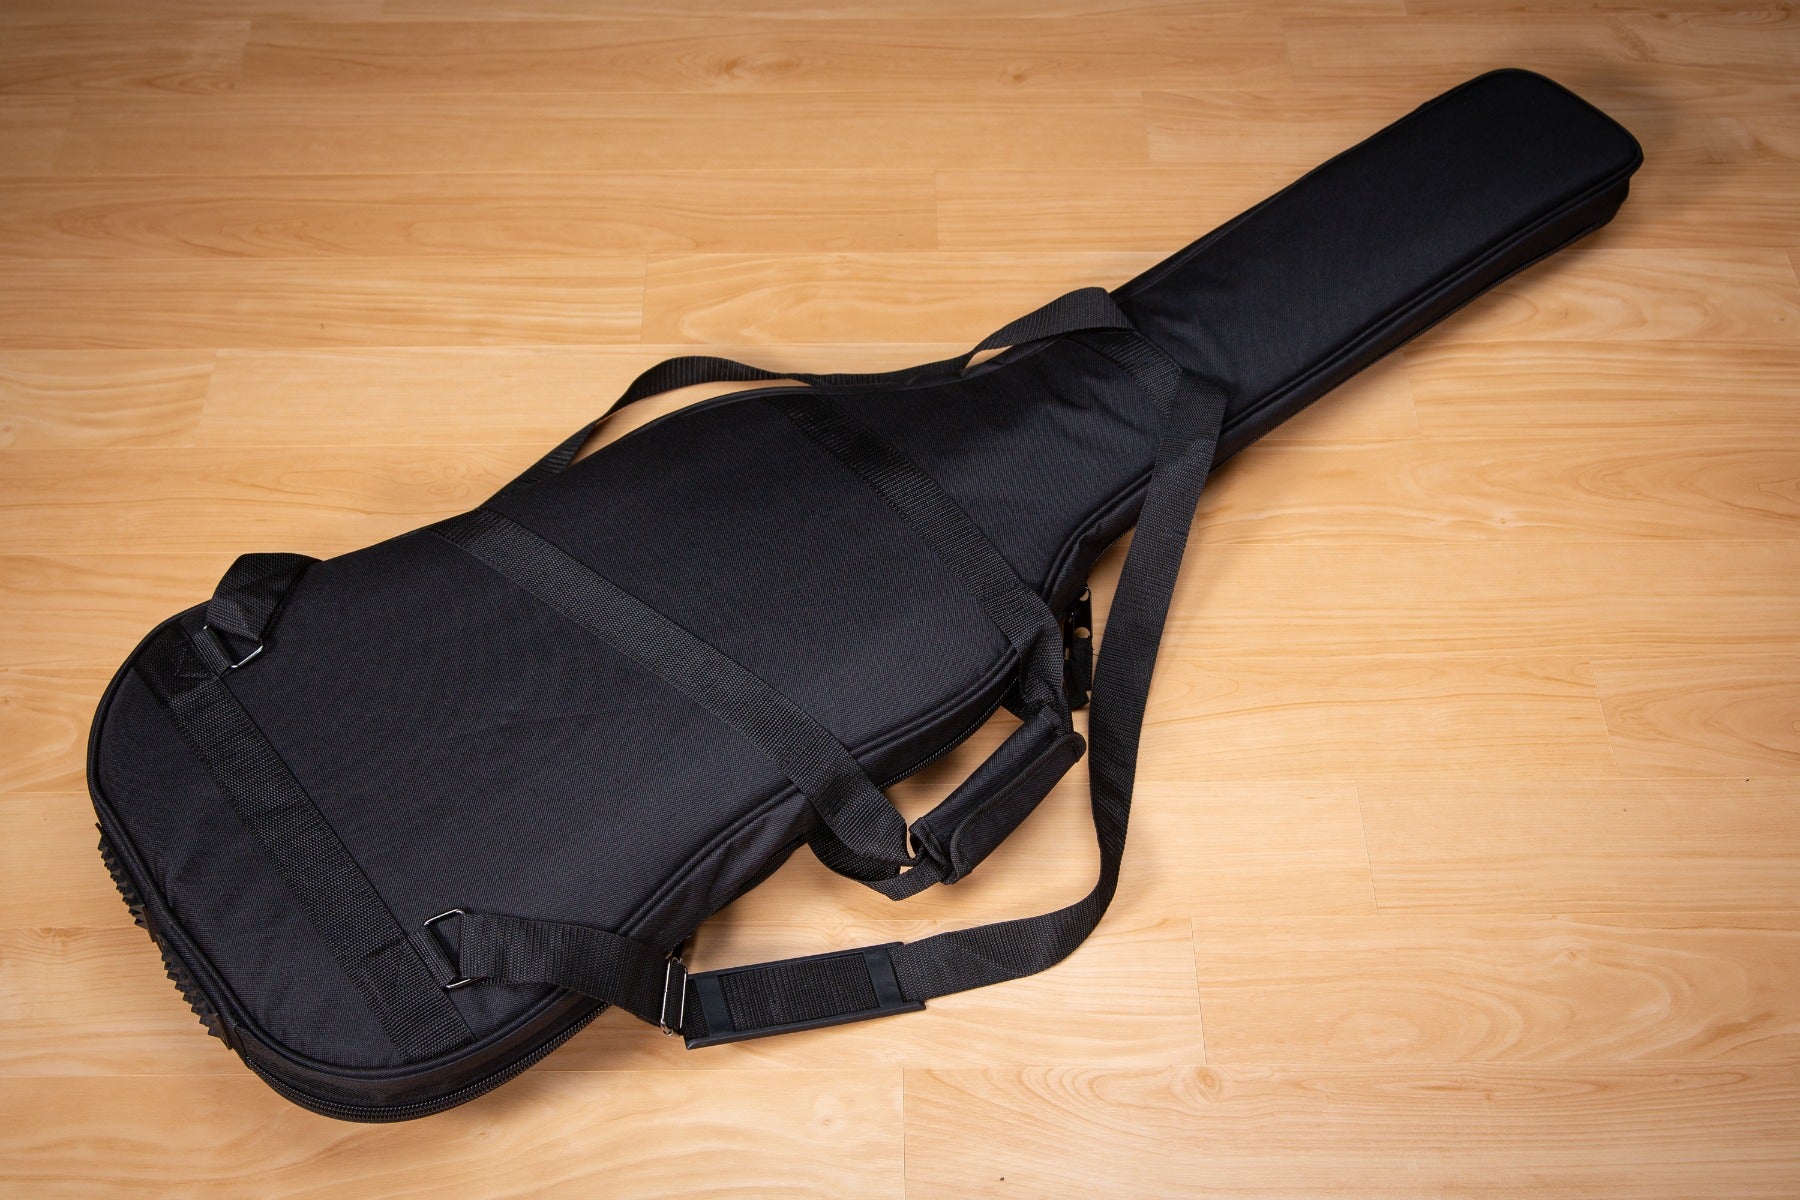 Included guitar bag for the Spector NS Ethos 5 Bass Guitar - Interstellar Gloss view 2